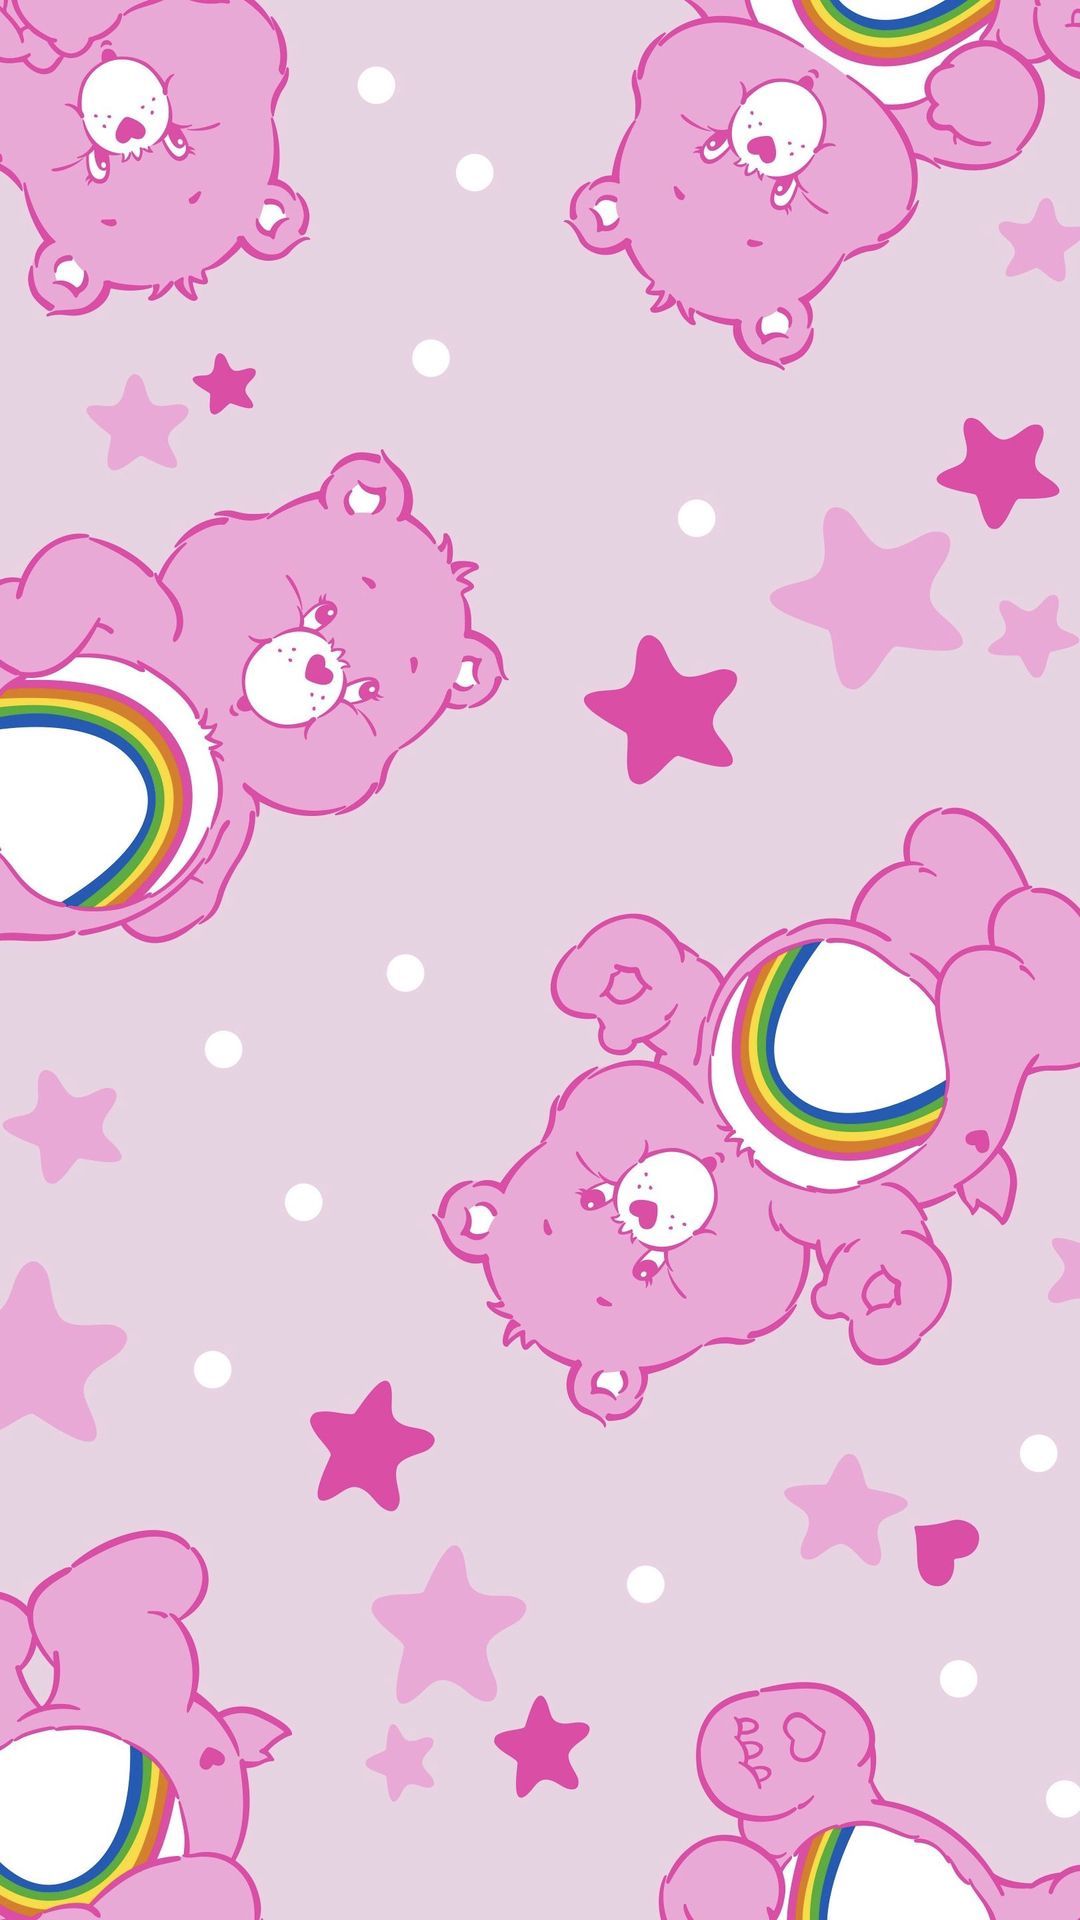 Care Bears iPhone Wallpaper with high-resolution 1080x1920 pixel. You can use this wallpaper for your iPhone 5, 6, 7, 8, X, XS, XR backgrounds, Mobile Screensaver, or iPad Lock Screen - Kidcore, Care Bears